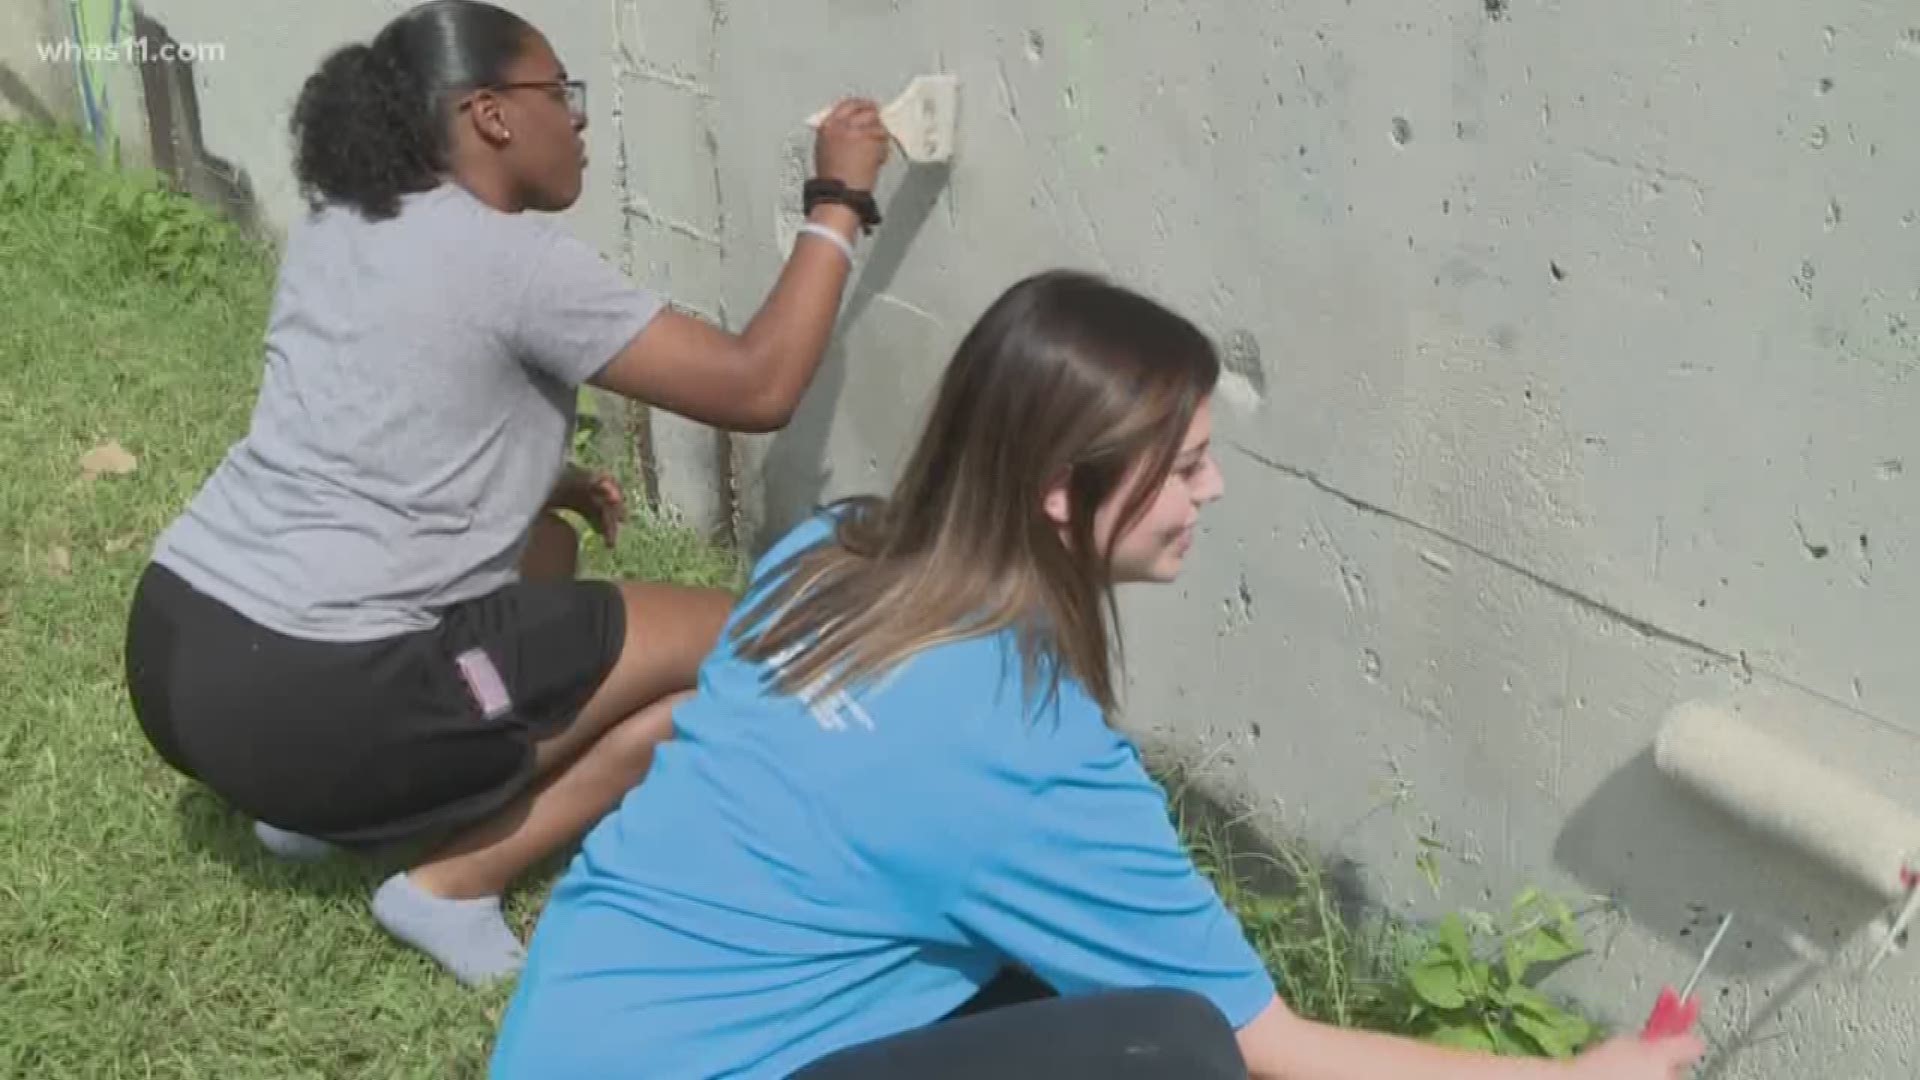 Students gather to clean up litter and paint over graffiti, not too far from the University of Louisville campus.